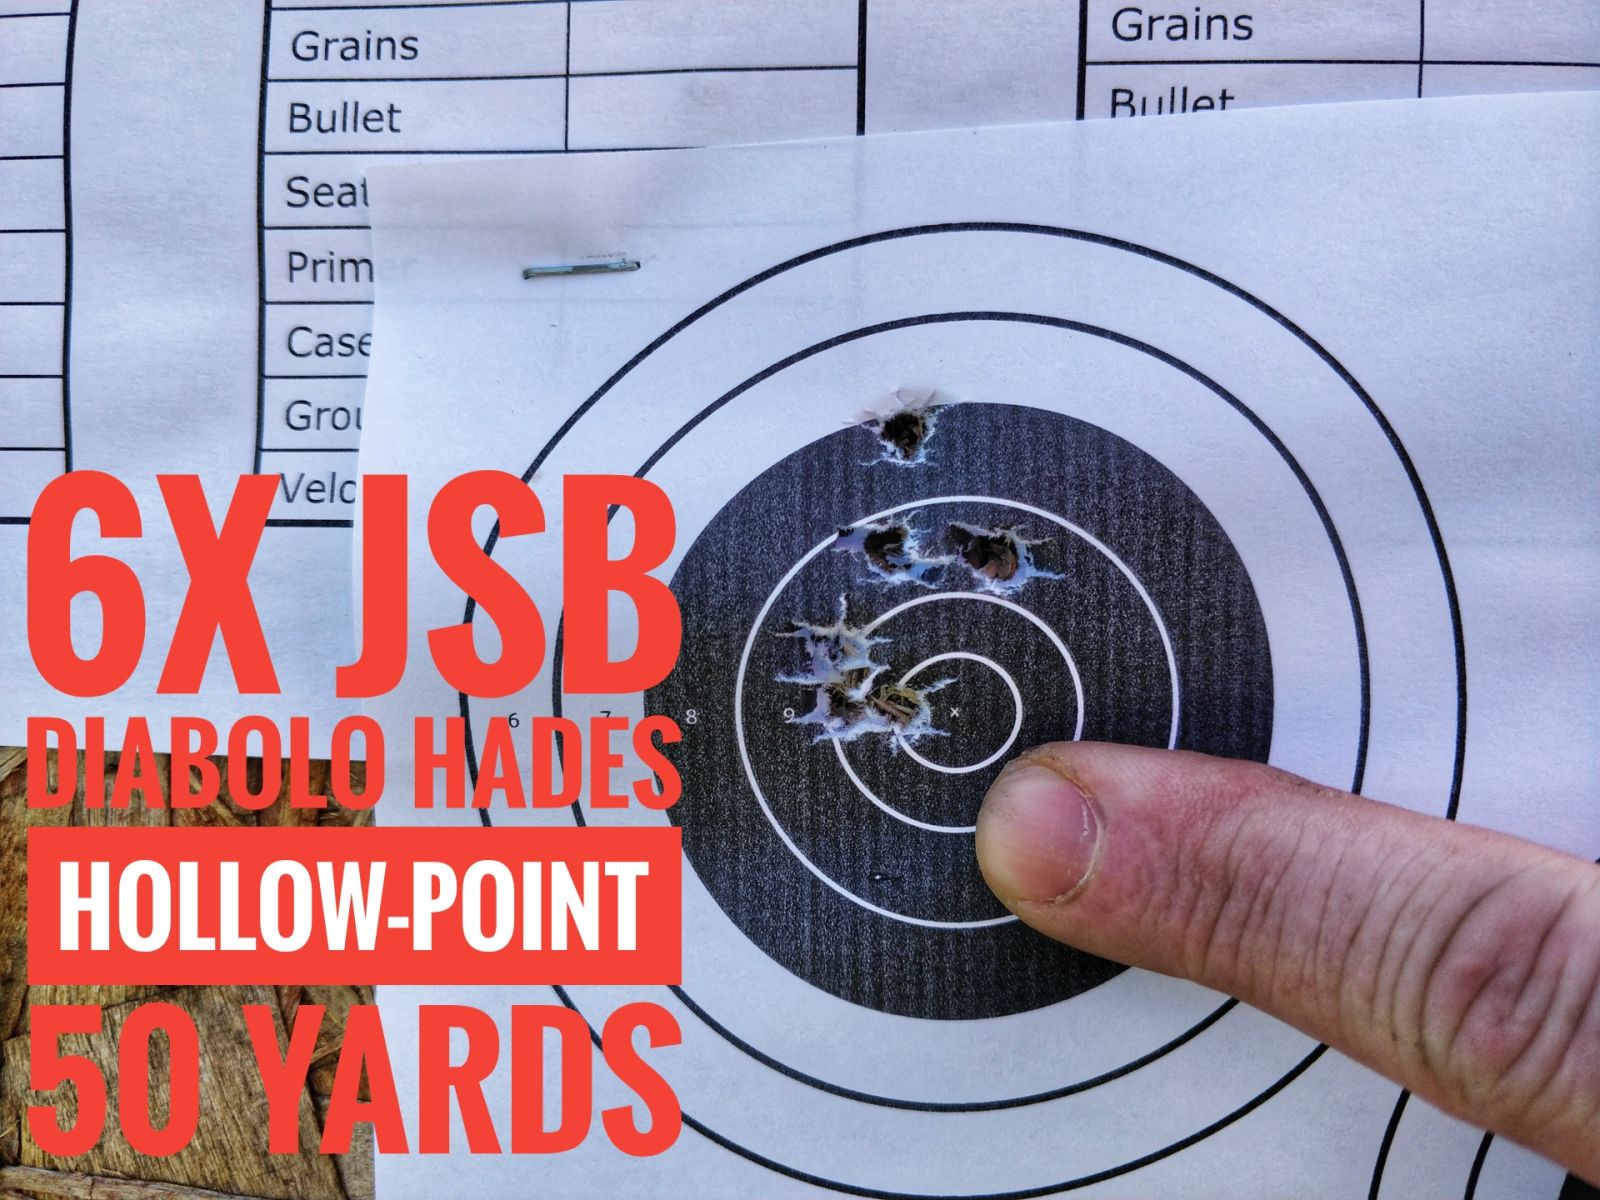 Still very good results for a hollow-point. I understand why people are talking about these. This is a very, very good group for a ~16 grain .22 hollow-point pellet. 